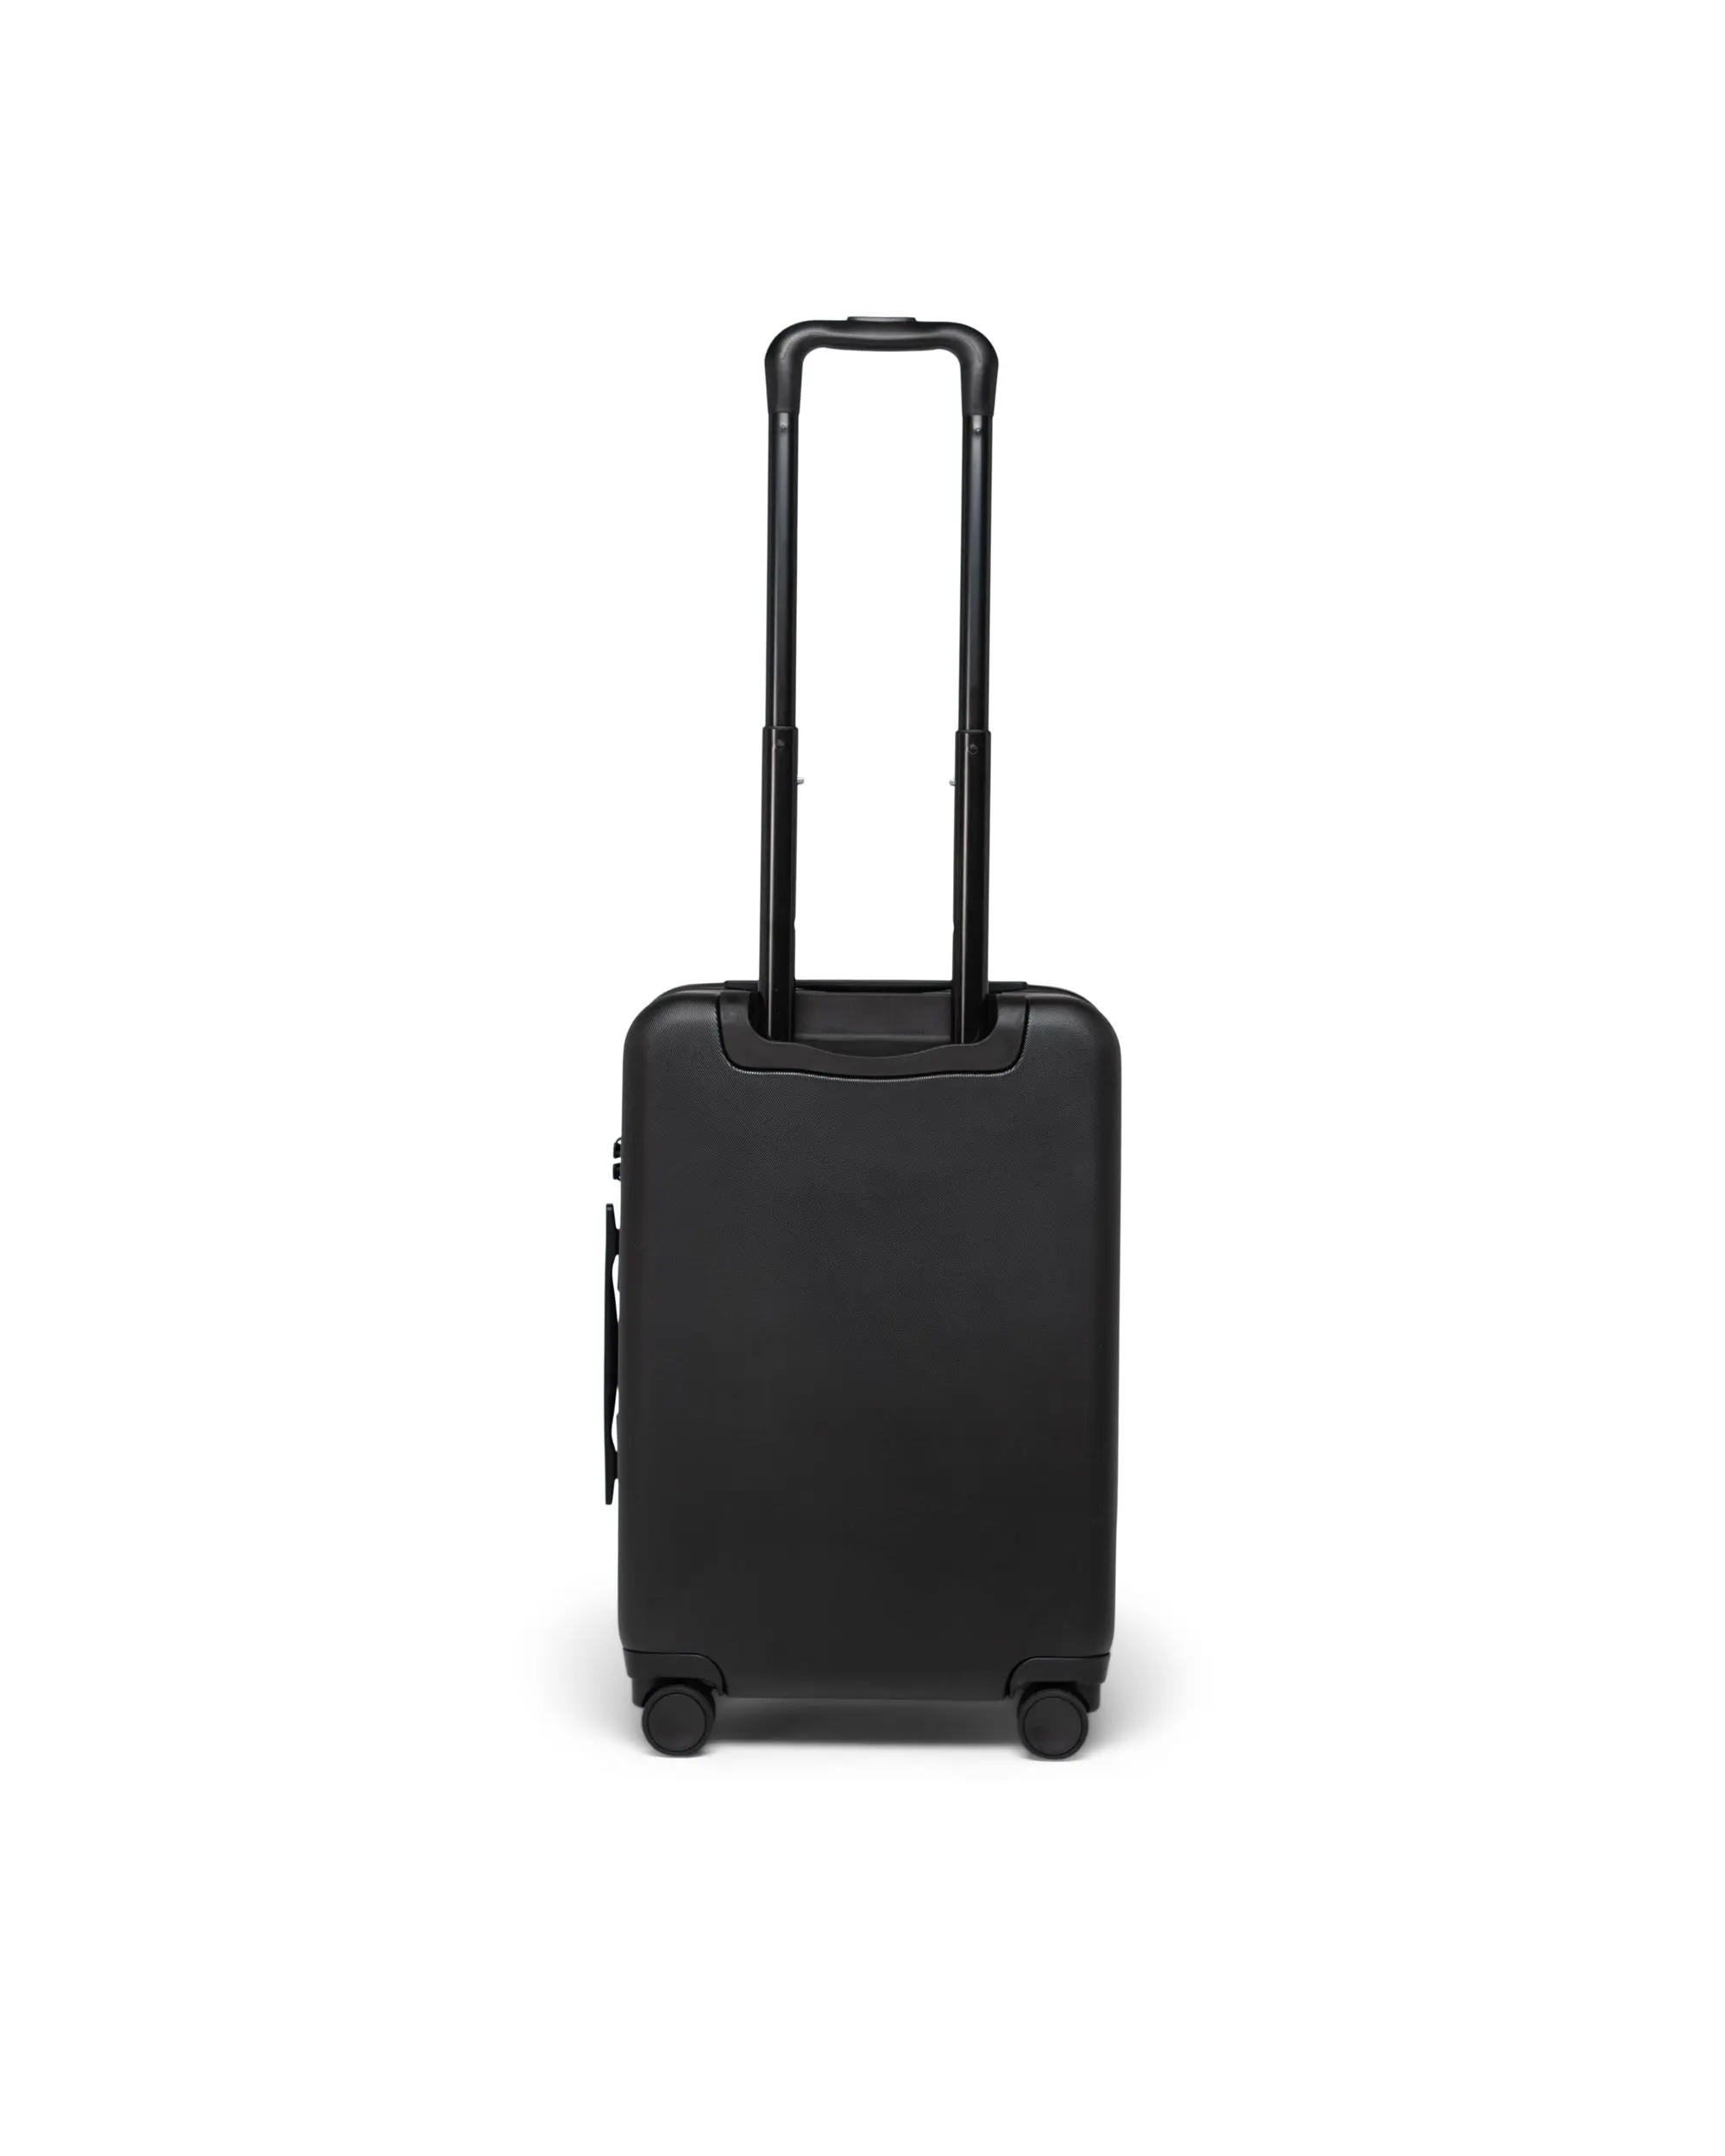 Herschel Supply Co. Heritage Hardshell Large Carry-On Luggage in Black